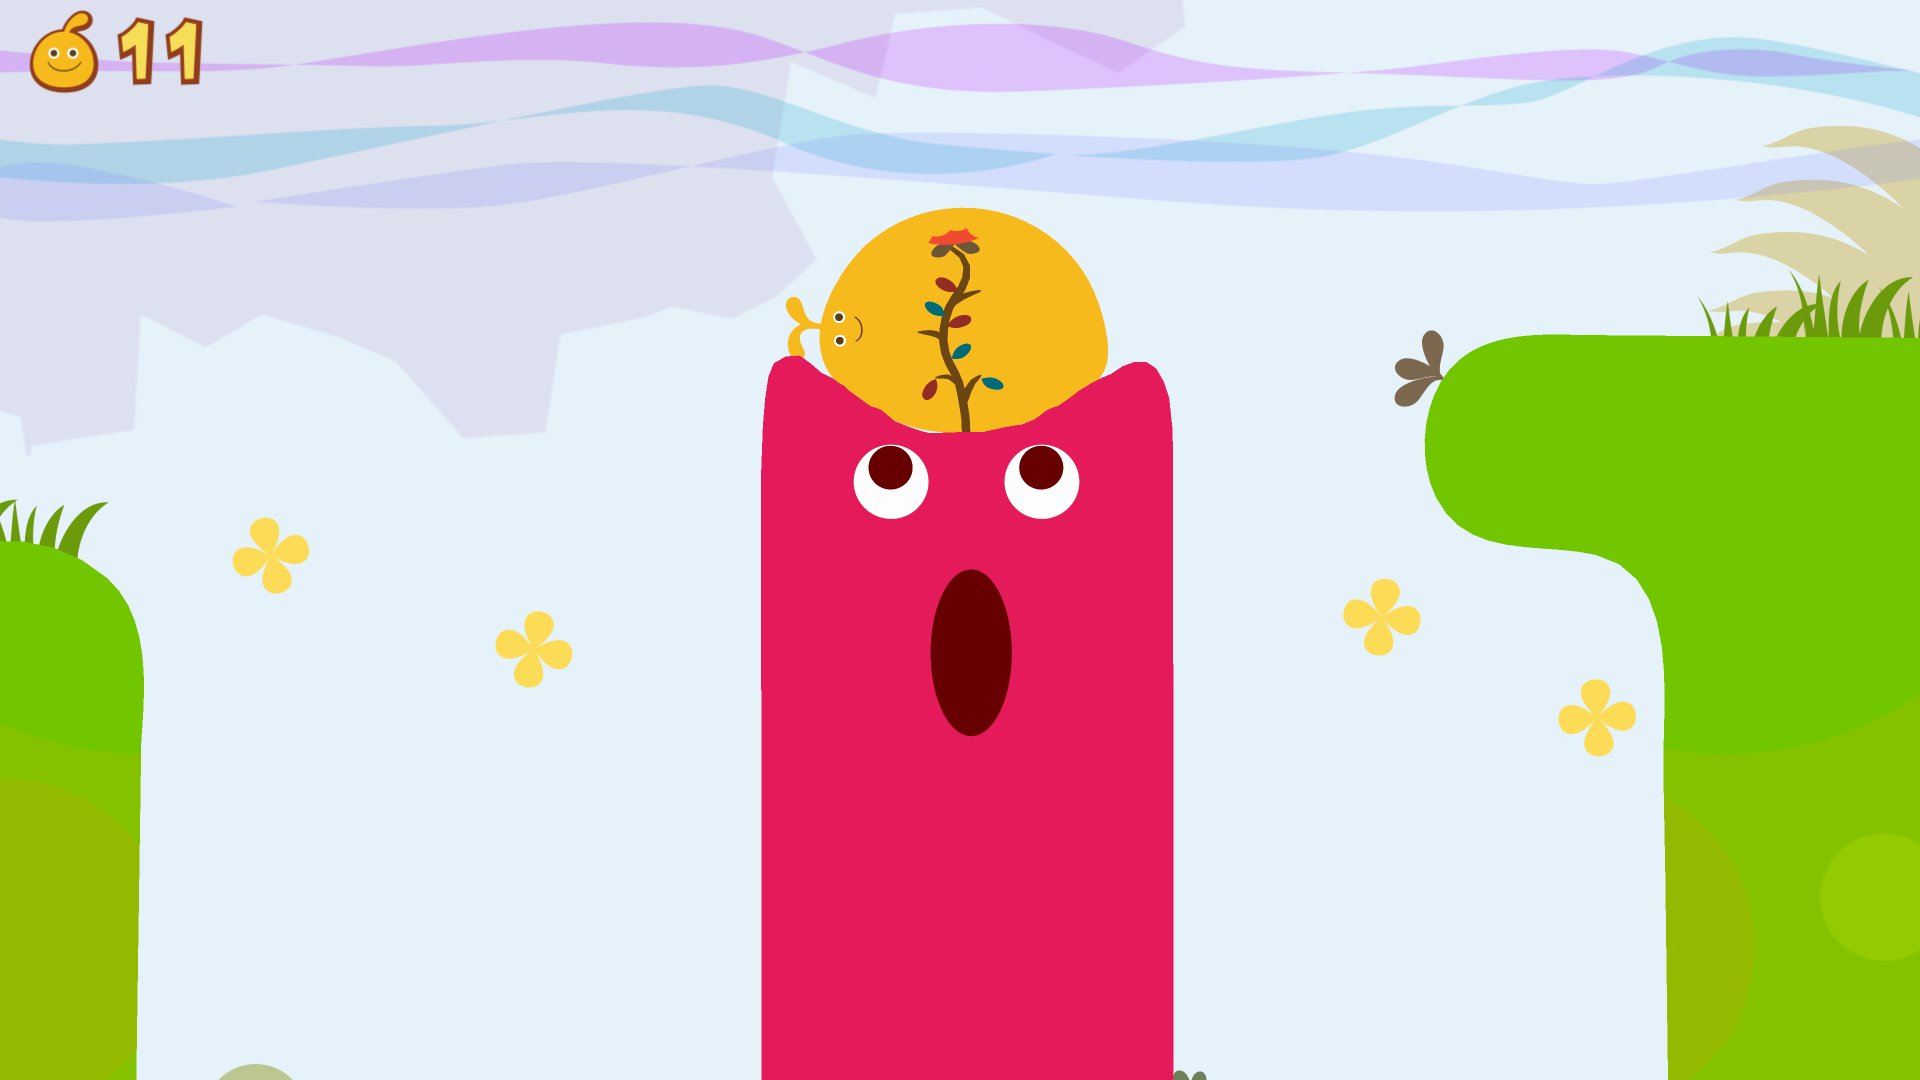 LocoRoco Remastered (PS4): COMPLETED!